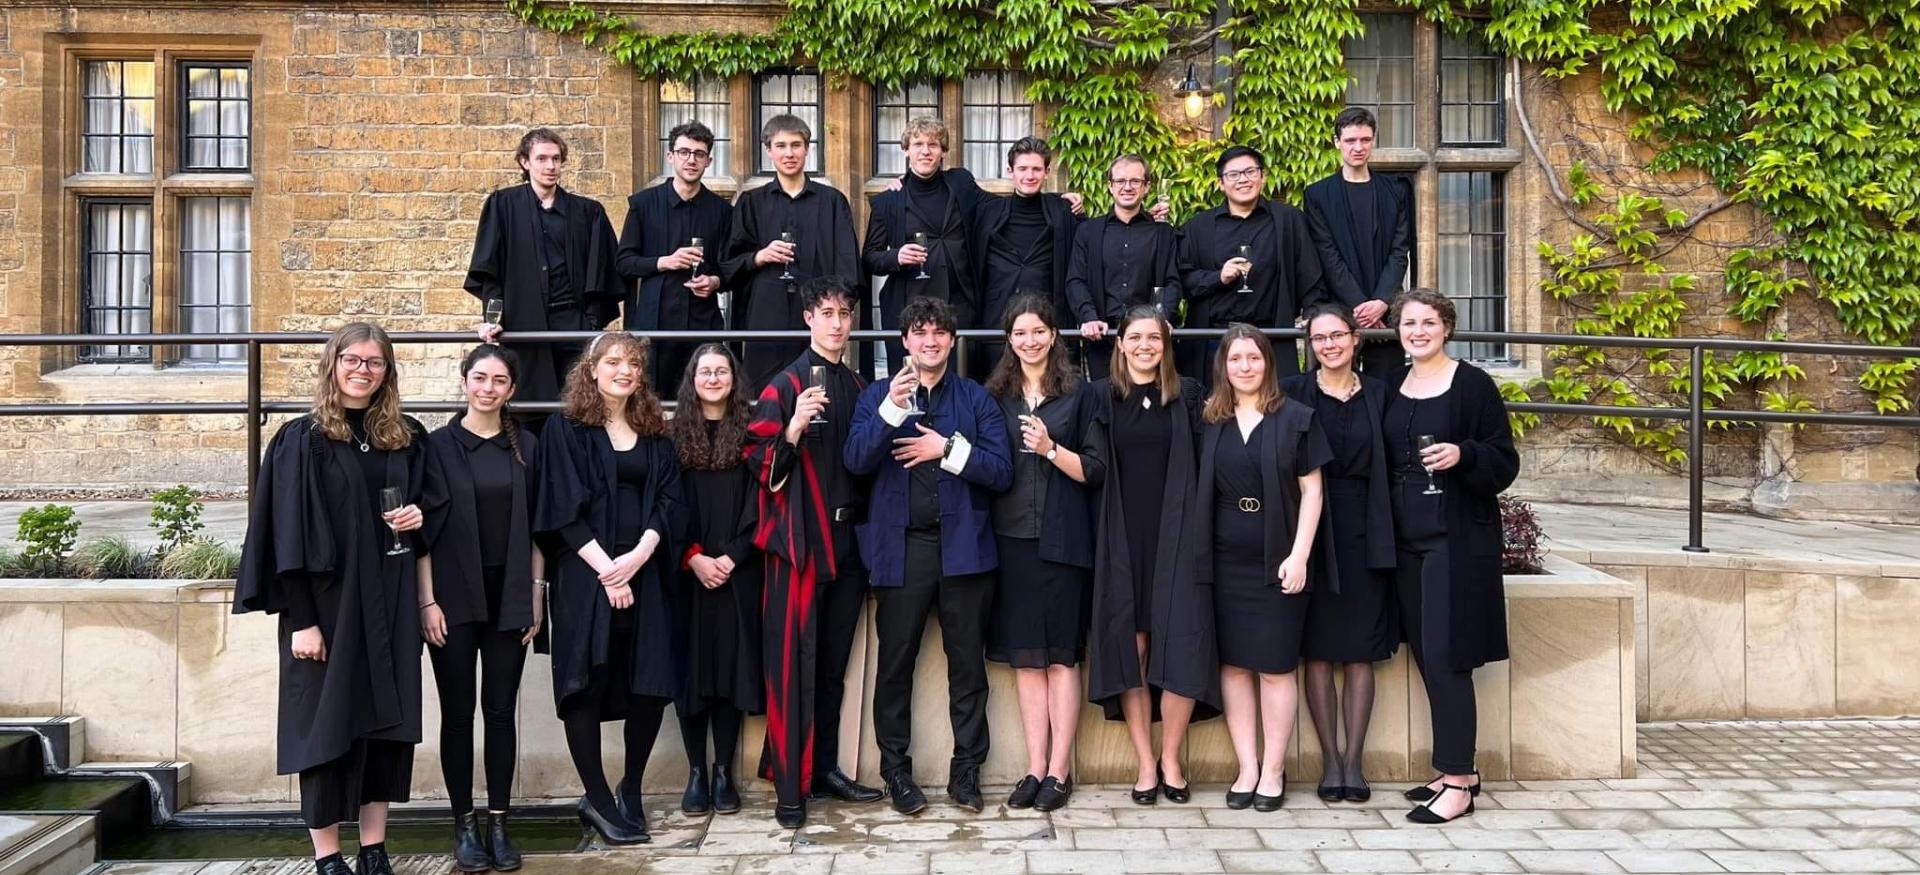 The Trinity College chapel choir pose in the library quad of Trinity college in gowns.